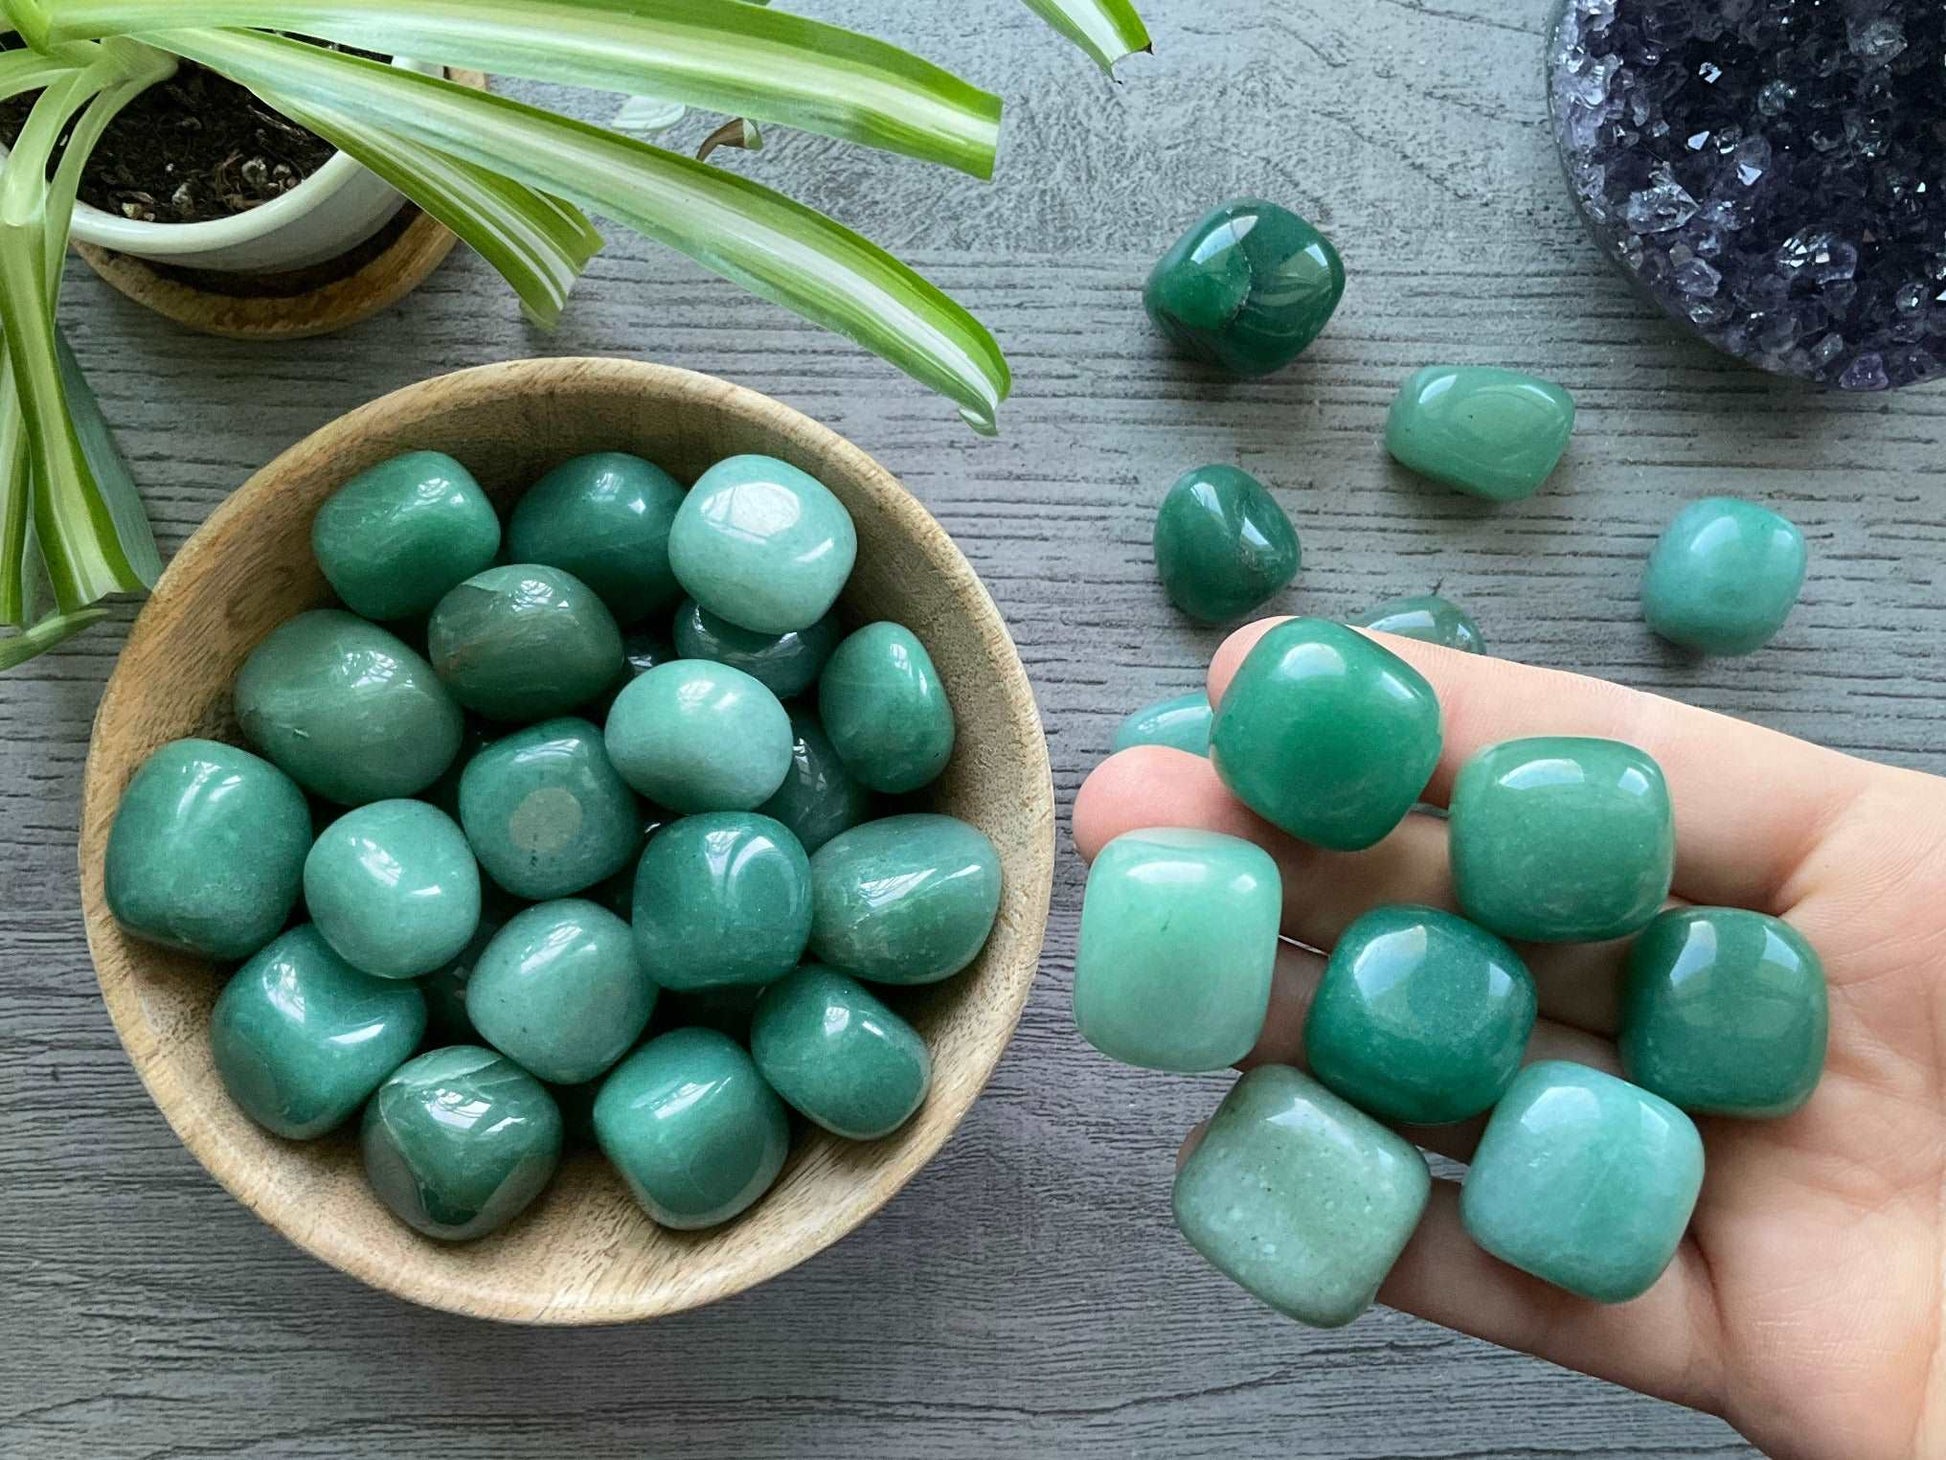 Green Aventurine Tumbled Crystal Cubes close up